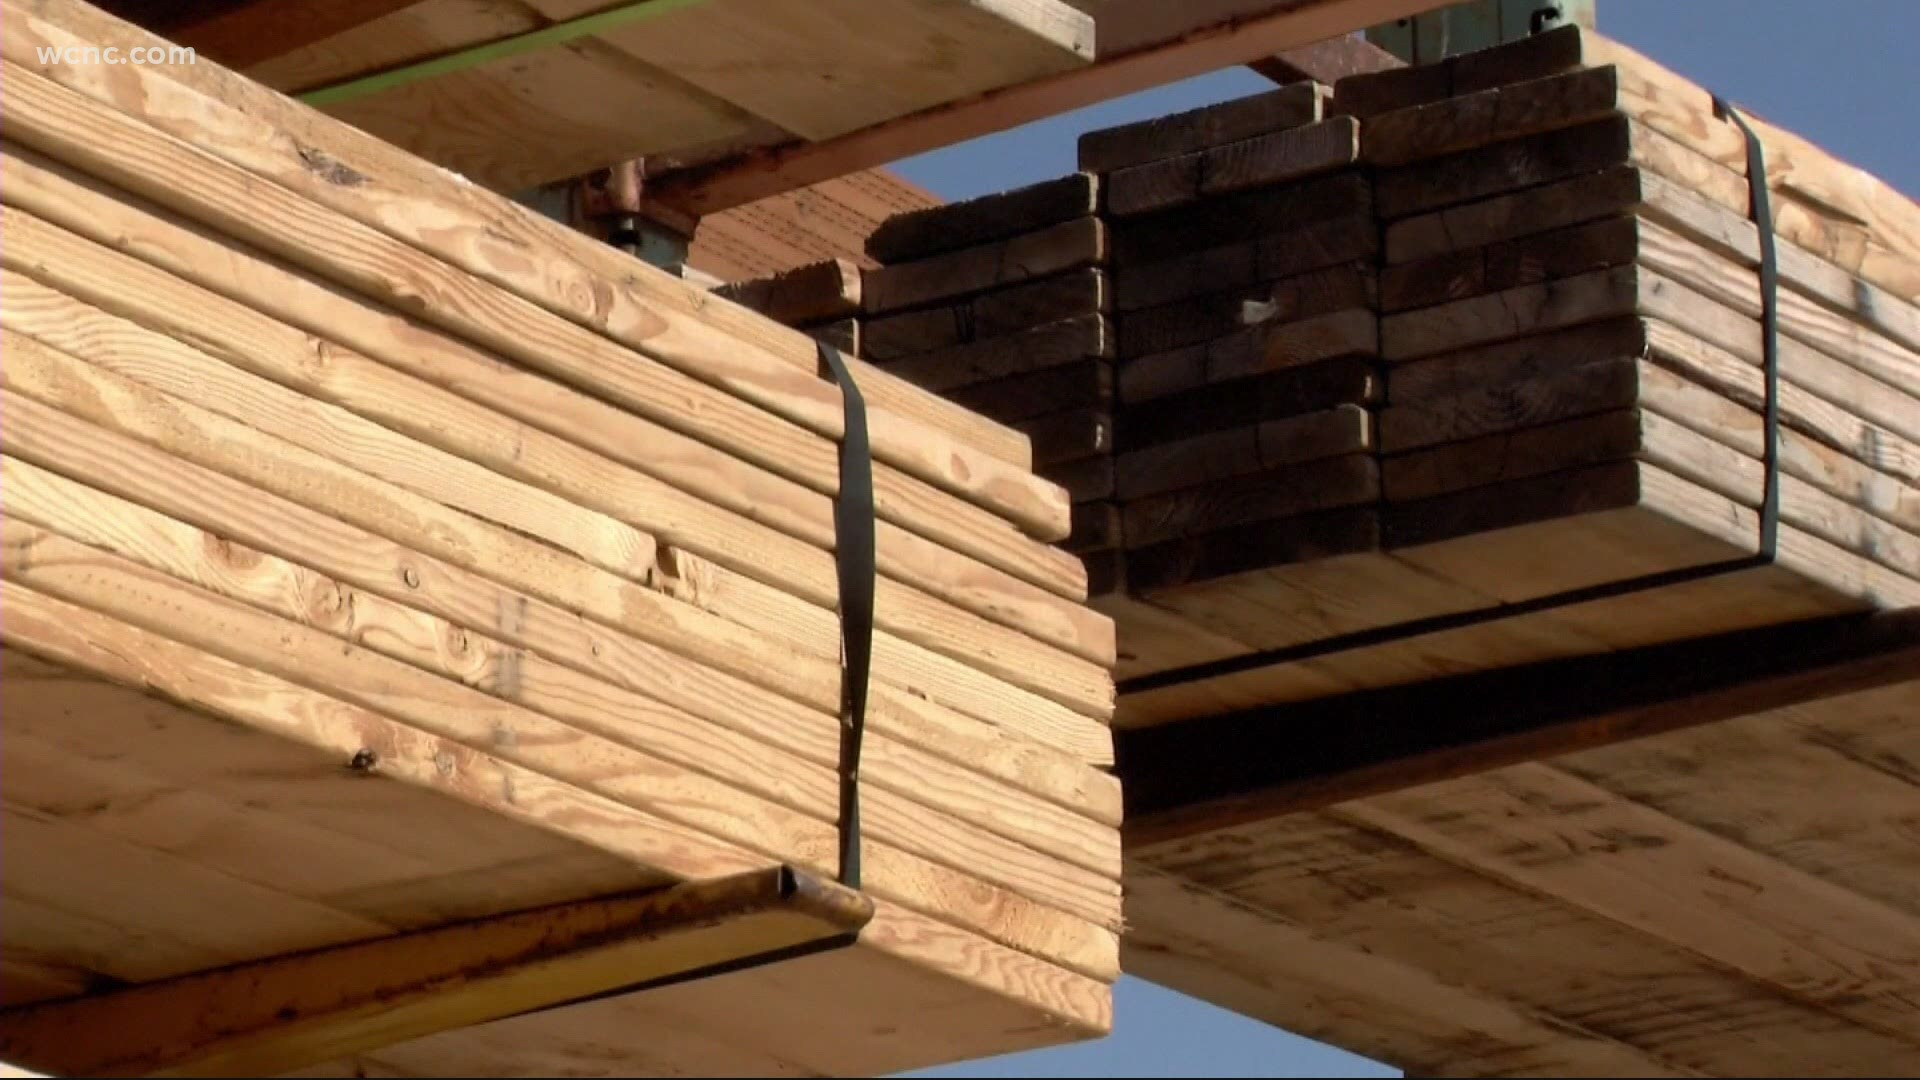 The price of lumber has tripled since the start of the pandemic and still remains high.